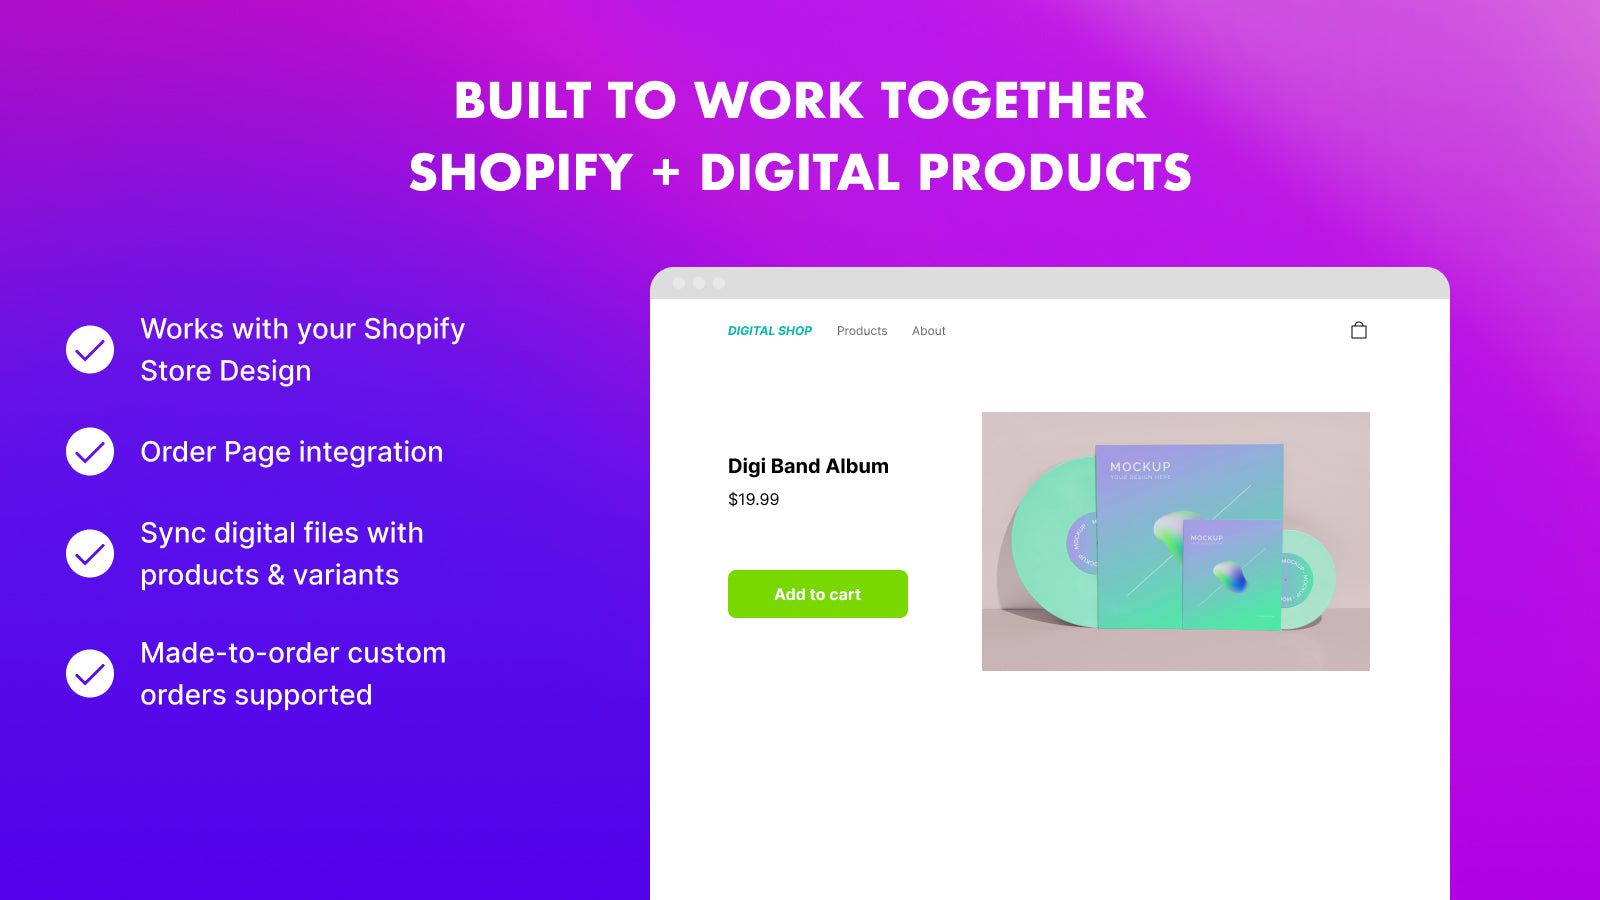 Built to work Together: Shopify + Digital Products